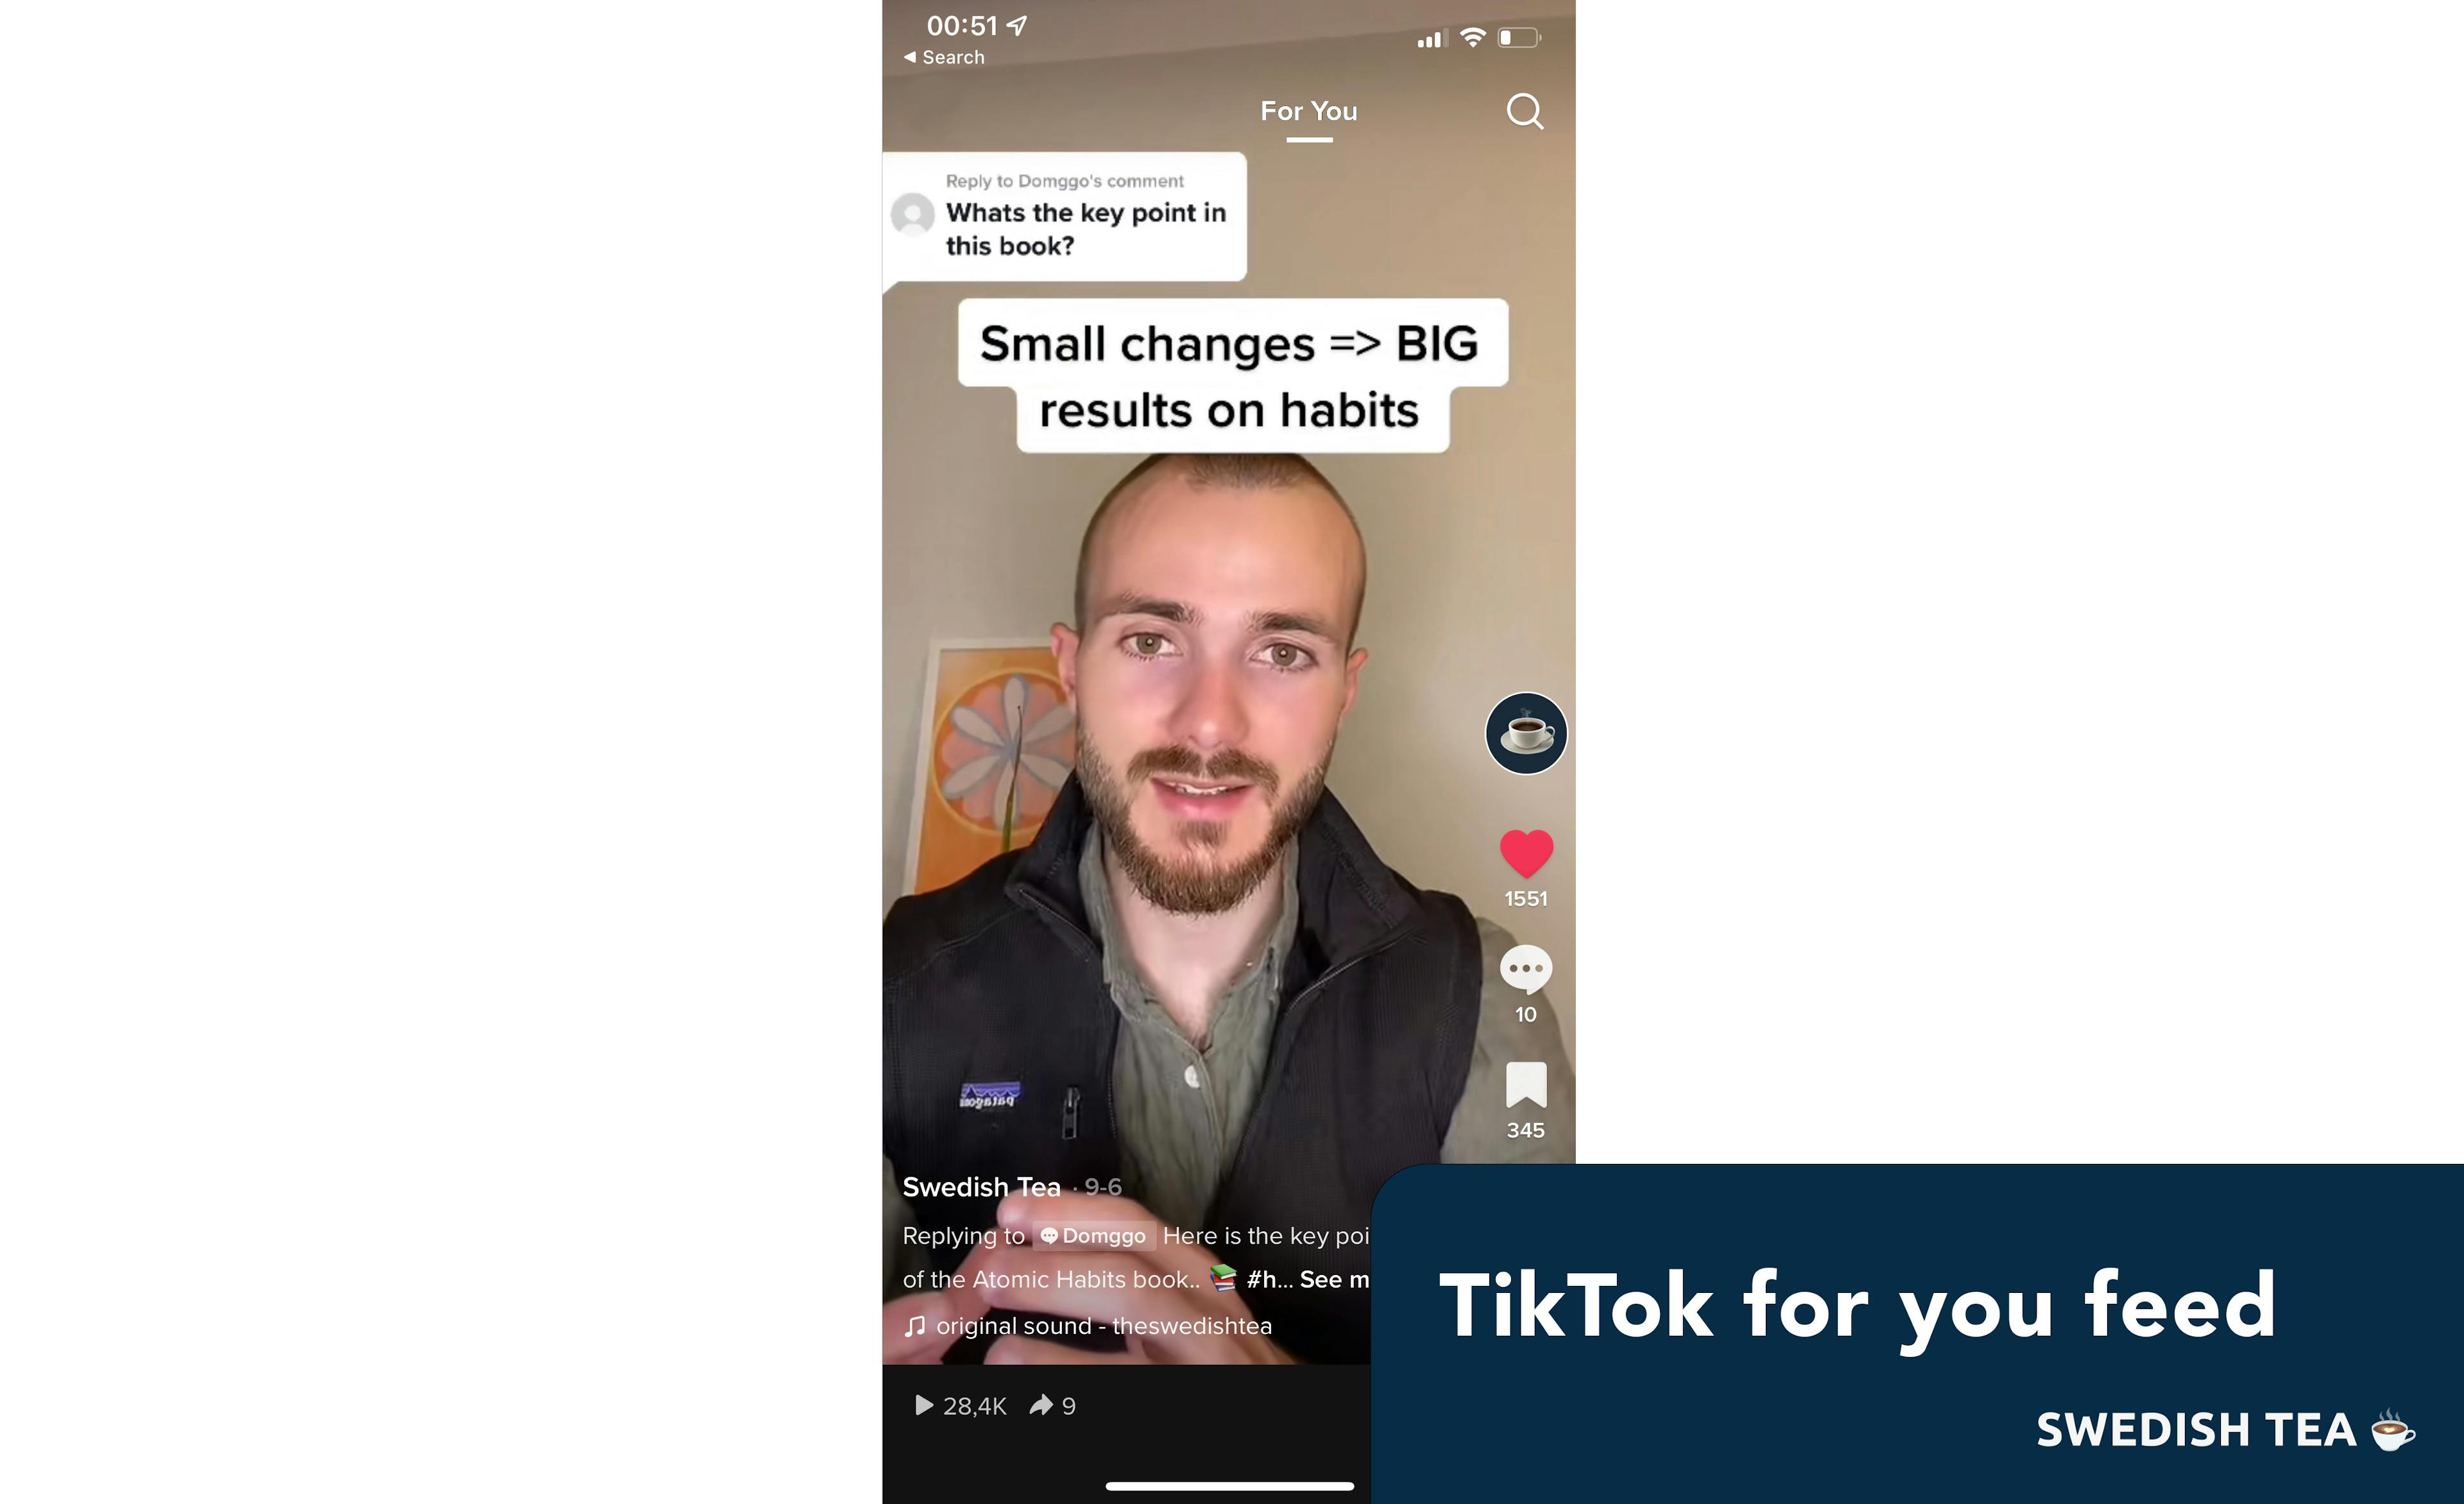 The TikTok for you feed